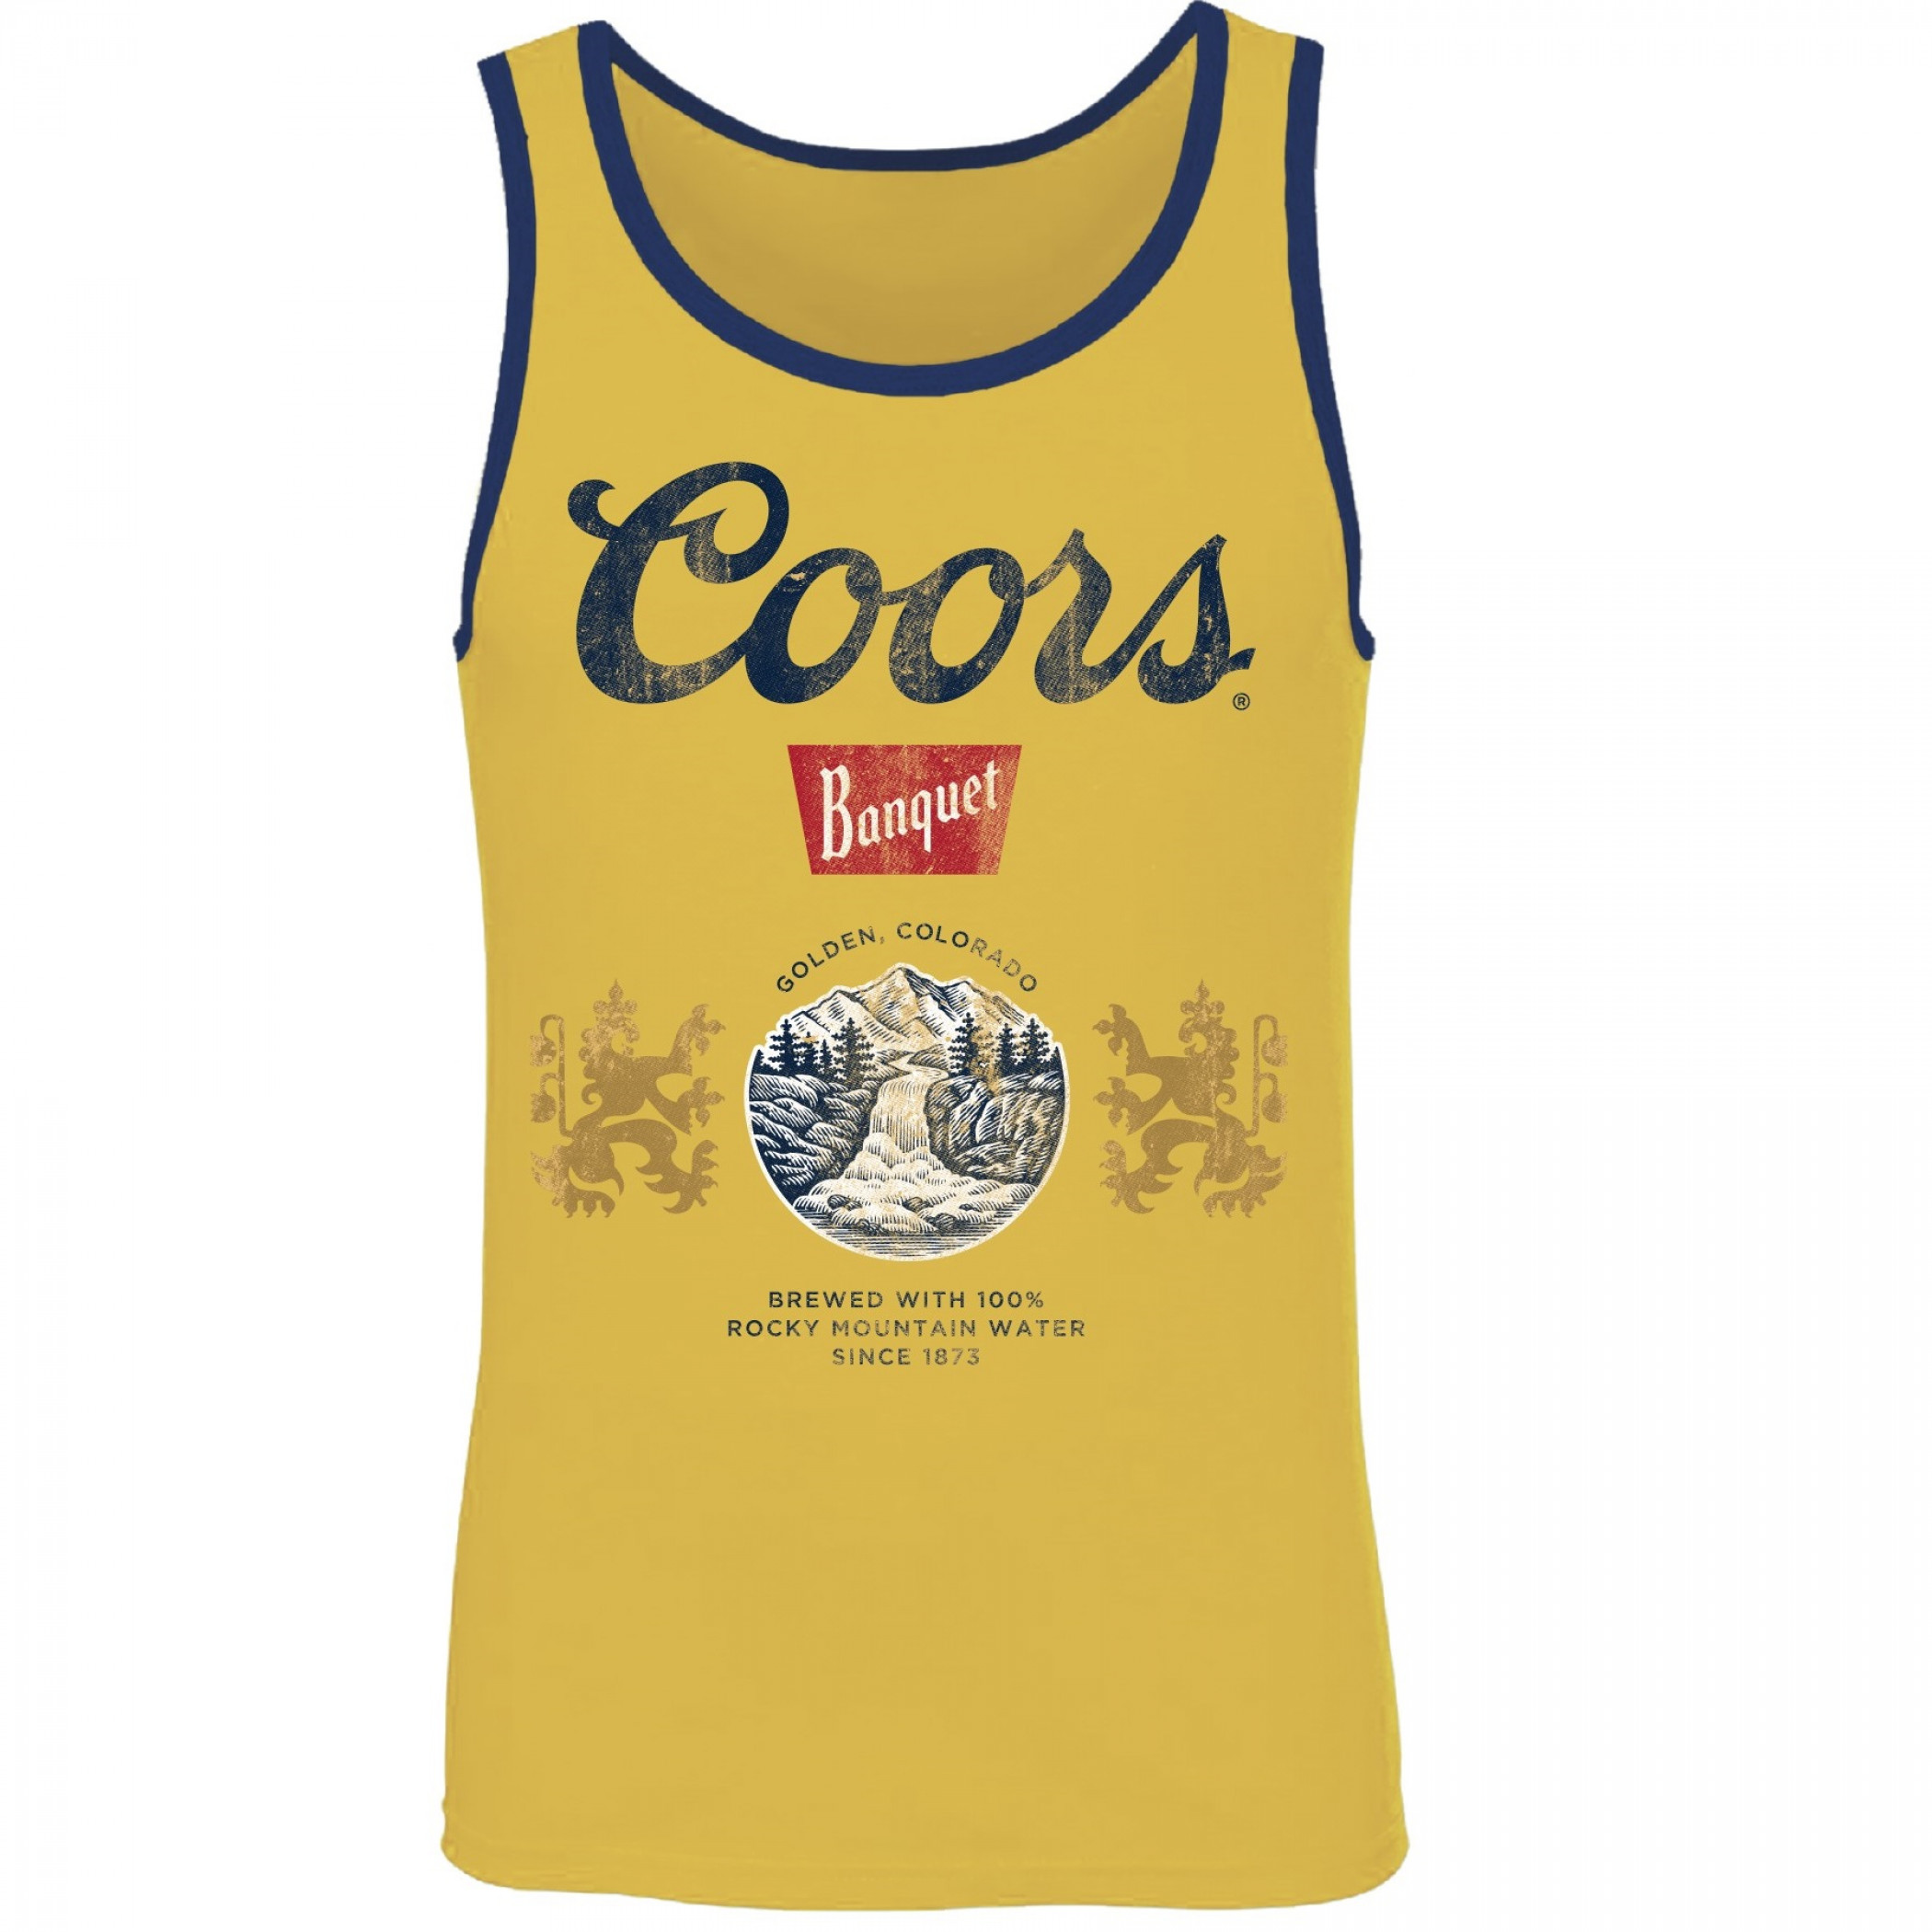 Coors Banquet Old Gold Tank Top With Navy Trim